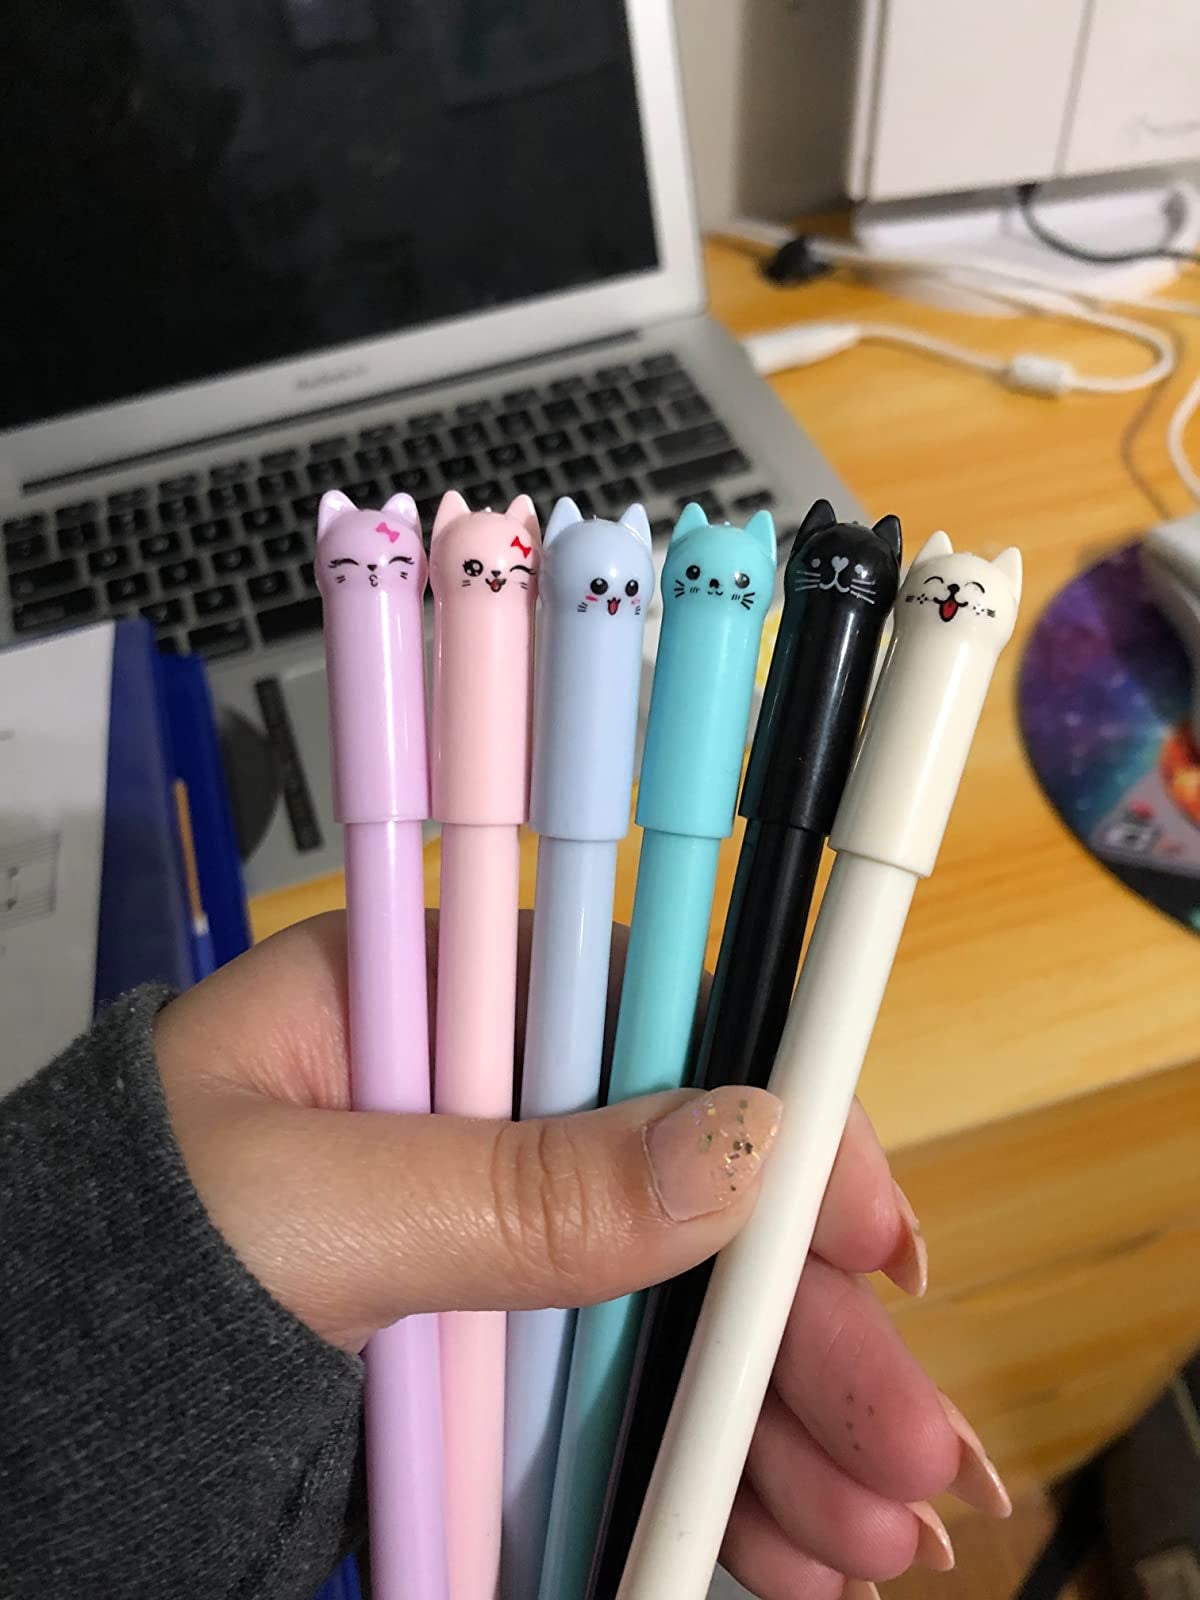 hand holding six of the colorful cat gel pens